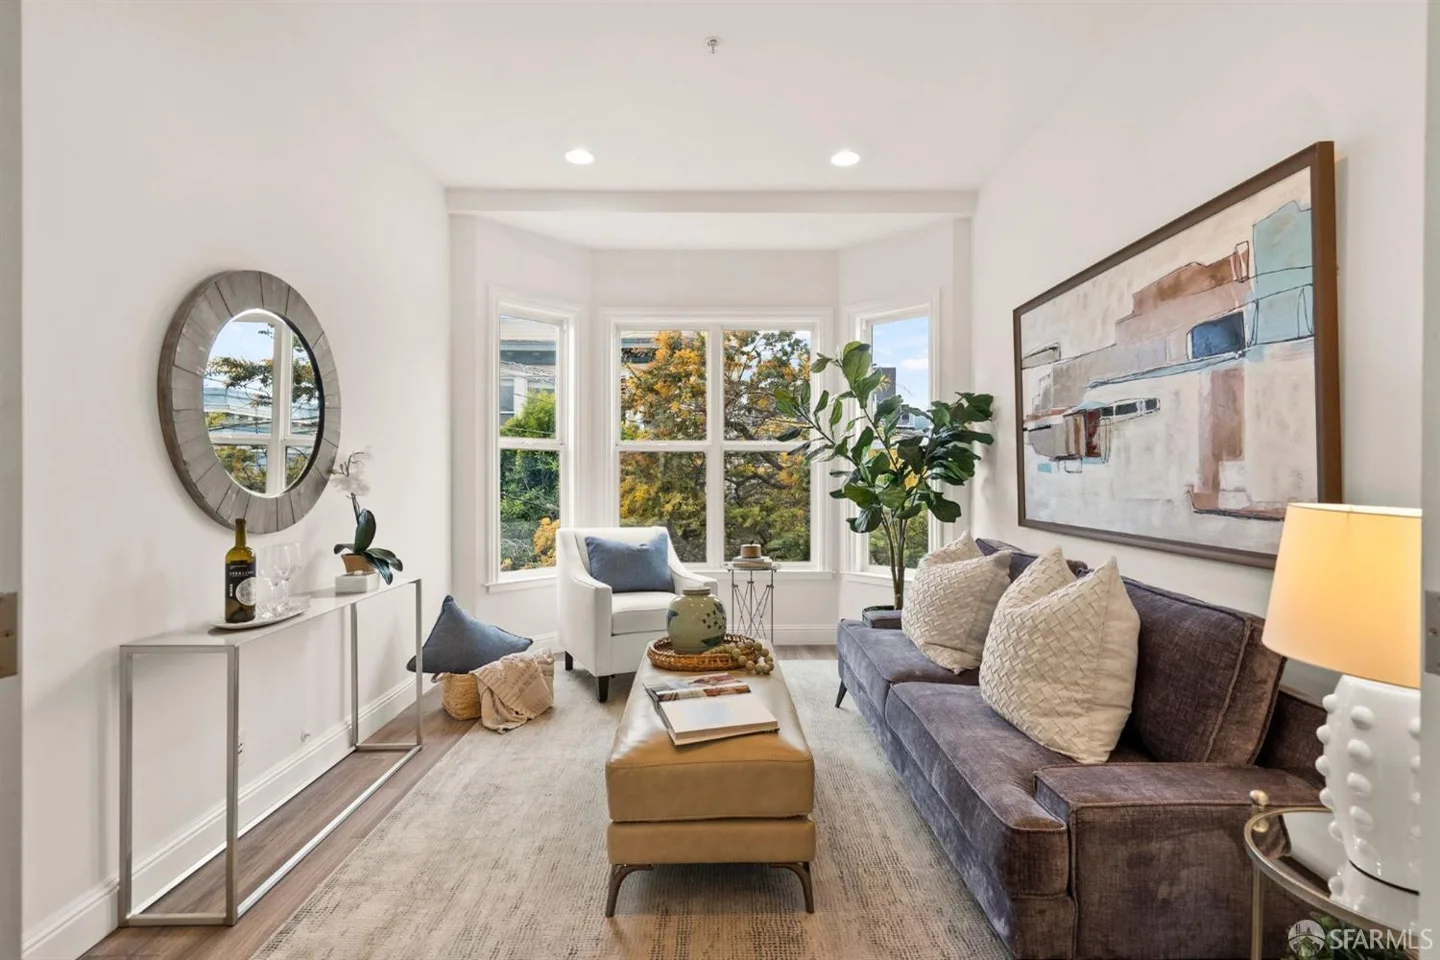 Spacious & Light-Filled Condo in the Mission